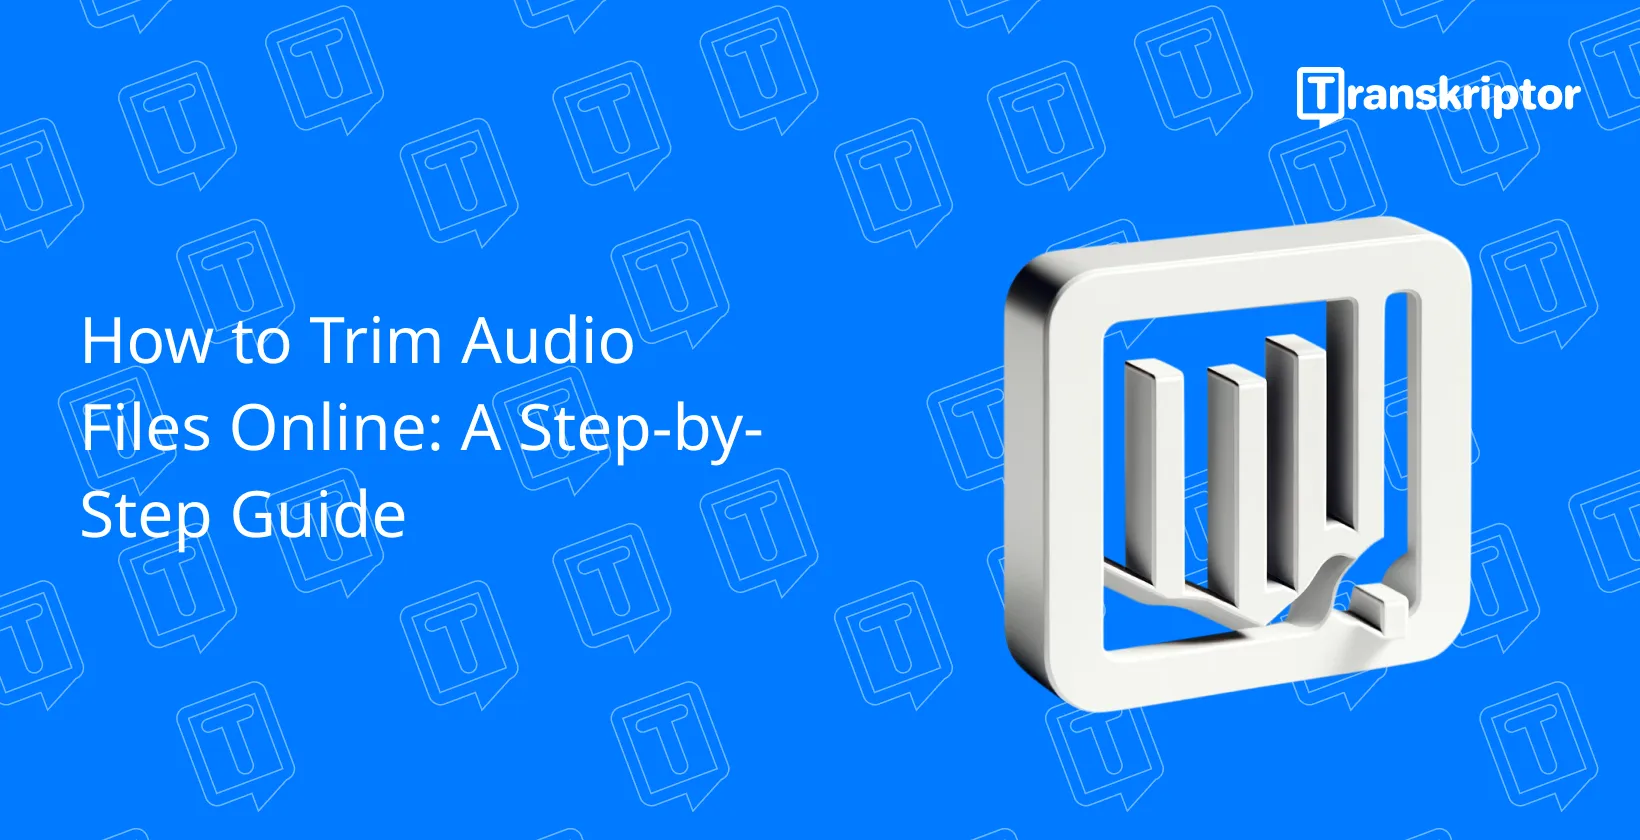 A digital guide on trimming audio files online featuring a logo with abstract book shapes.